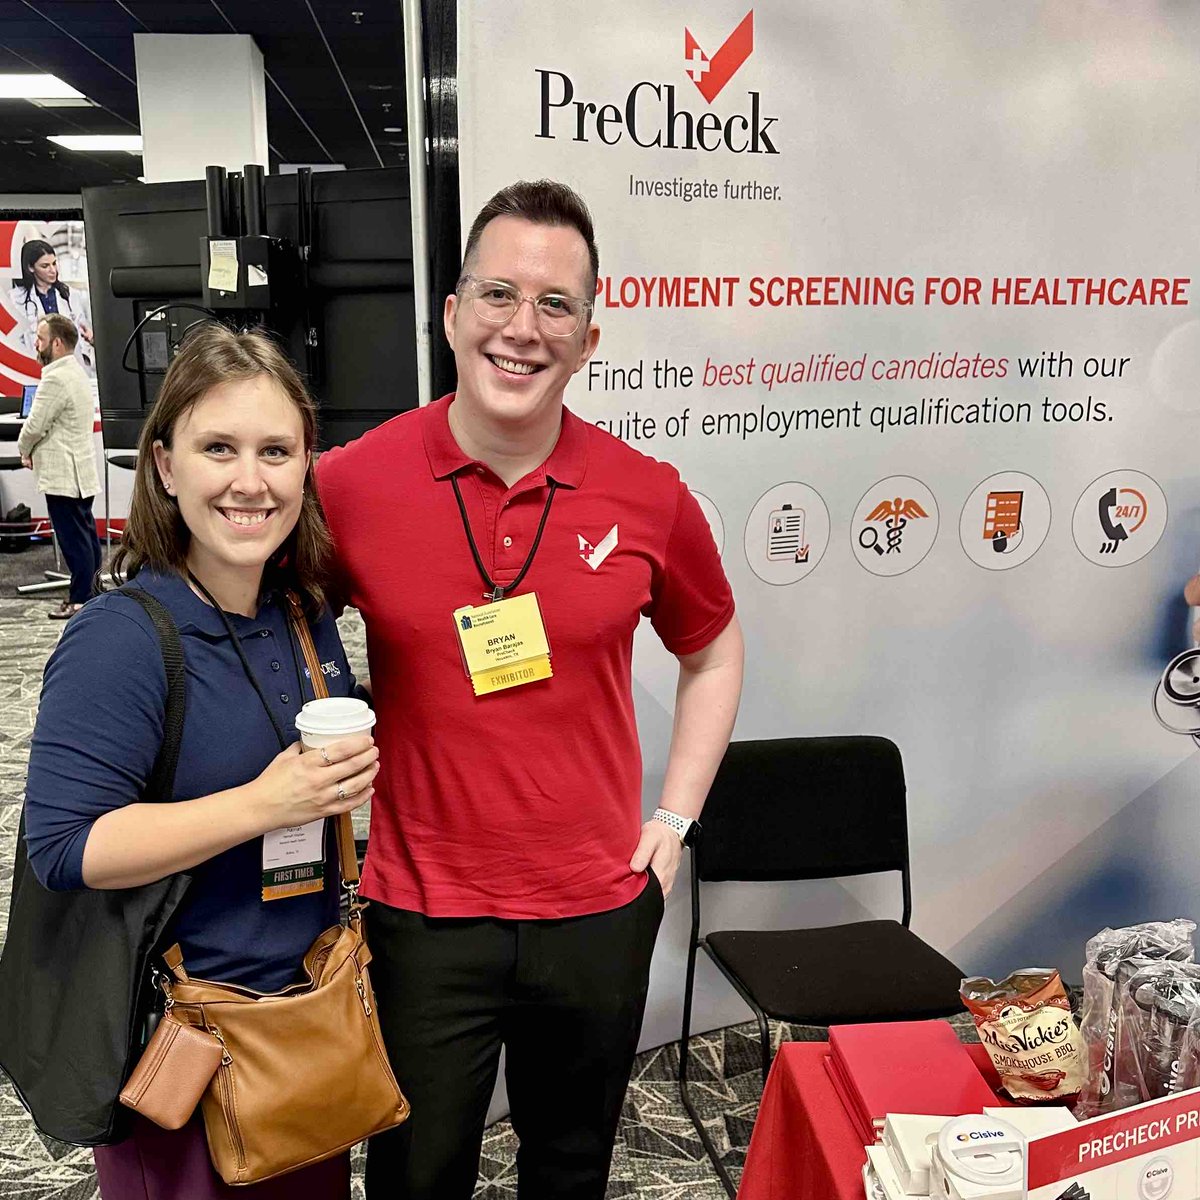 #NAHCR23 is in full swing and PreCheck is thrilled to see you at booth #207!

Thank you to our amazing clients Toni Broussard-Kizzee from @MDAndersonNews and Hannah Hinshaw from @HendrickHealth for stopping by to chat with our team! #healthcarerecruitment